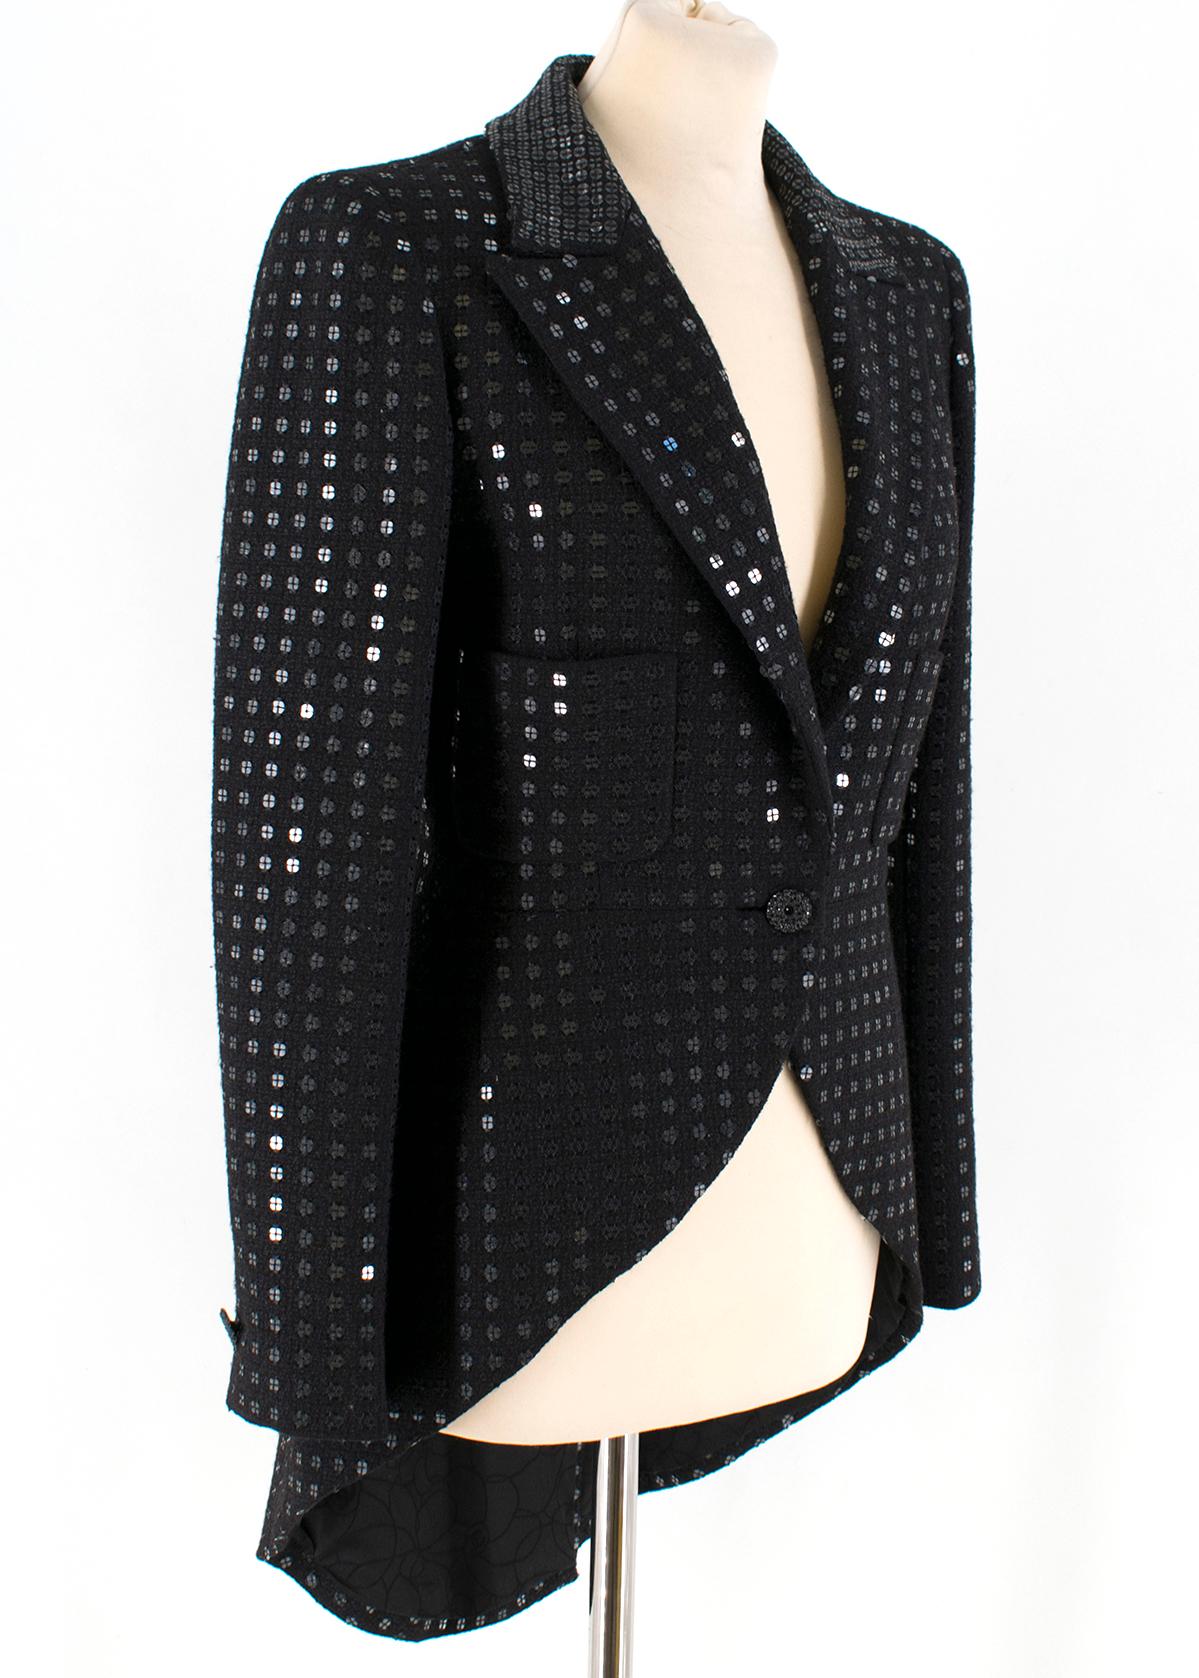 Chanel Black Sequin Tuxedo Jacket 

- Chanel Spring 2007 Collection 
- Black Tuxedo Jacket 
- Sequined thorughout 
- Peak lapel, single breasted 
- Dual front side slip pockets 
- Fluted Tail Blazer 
- Fully lined, silk lining 
- 50% Wool, 25% silk,